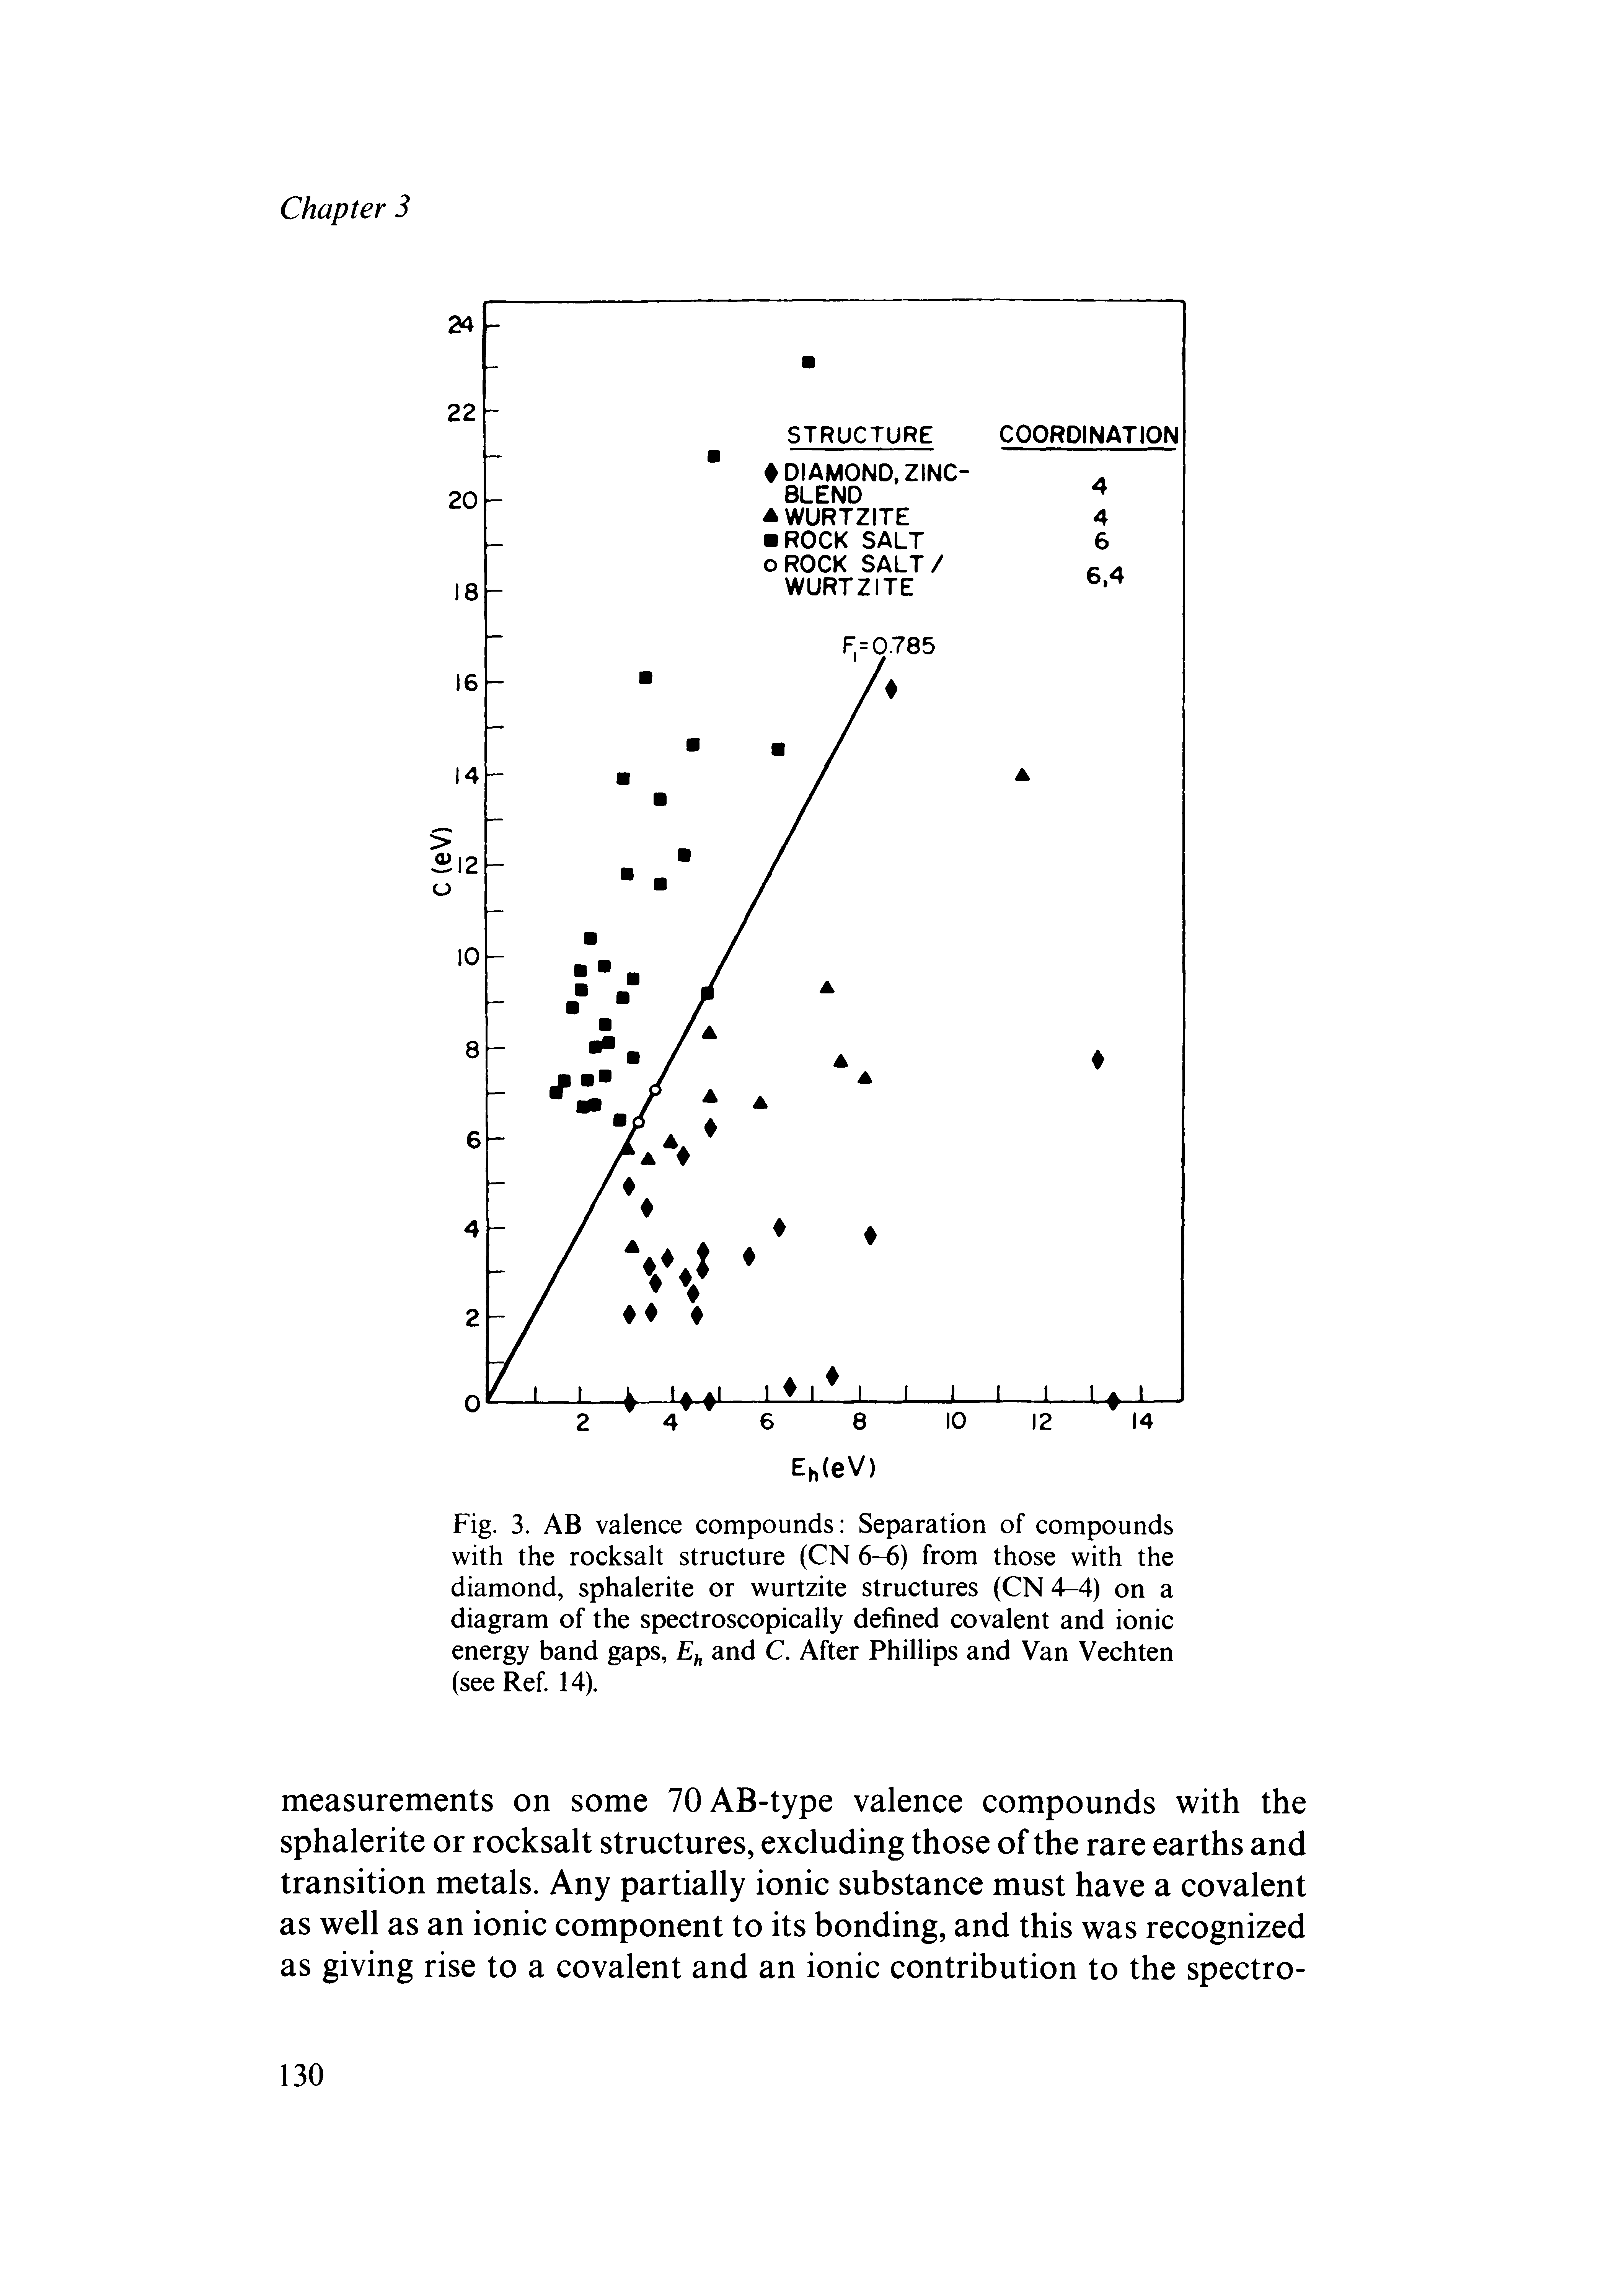 Fig. 3. AB valence compounds Separation of compounds with the rocksalt structure (CN 6-6) from those with the diamond, sphalerite or wurtzite structures (CN 4-4) on a diagram of the spectroscopically defined covalent and ionic energy band gaps, and C. After Phillips and Van Vechten (see Ref. 14).